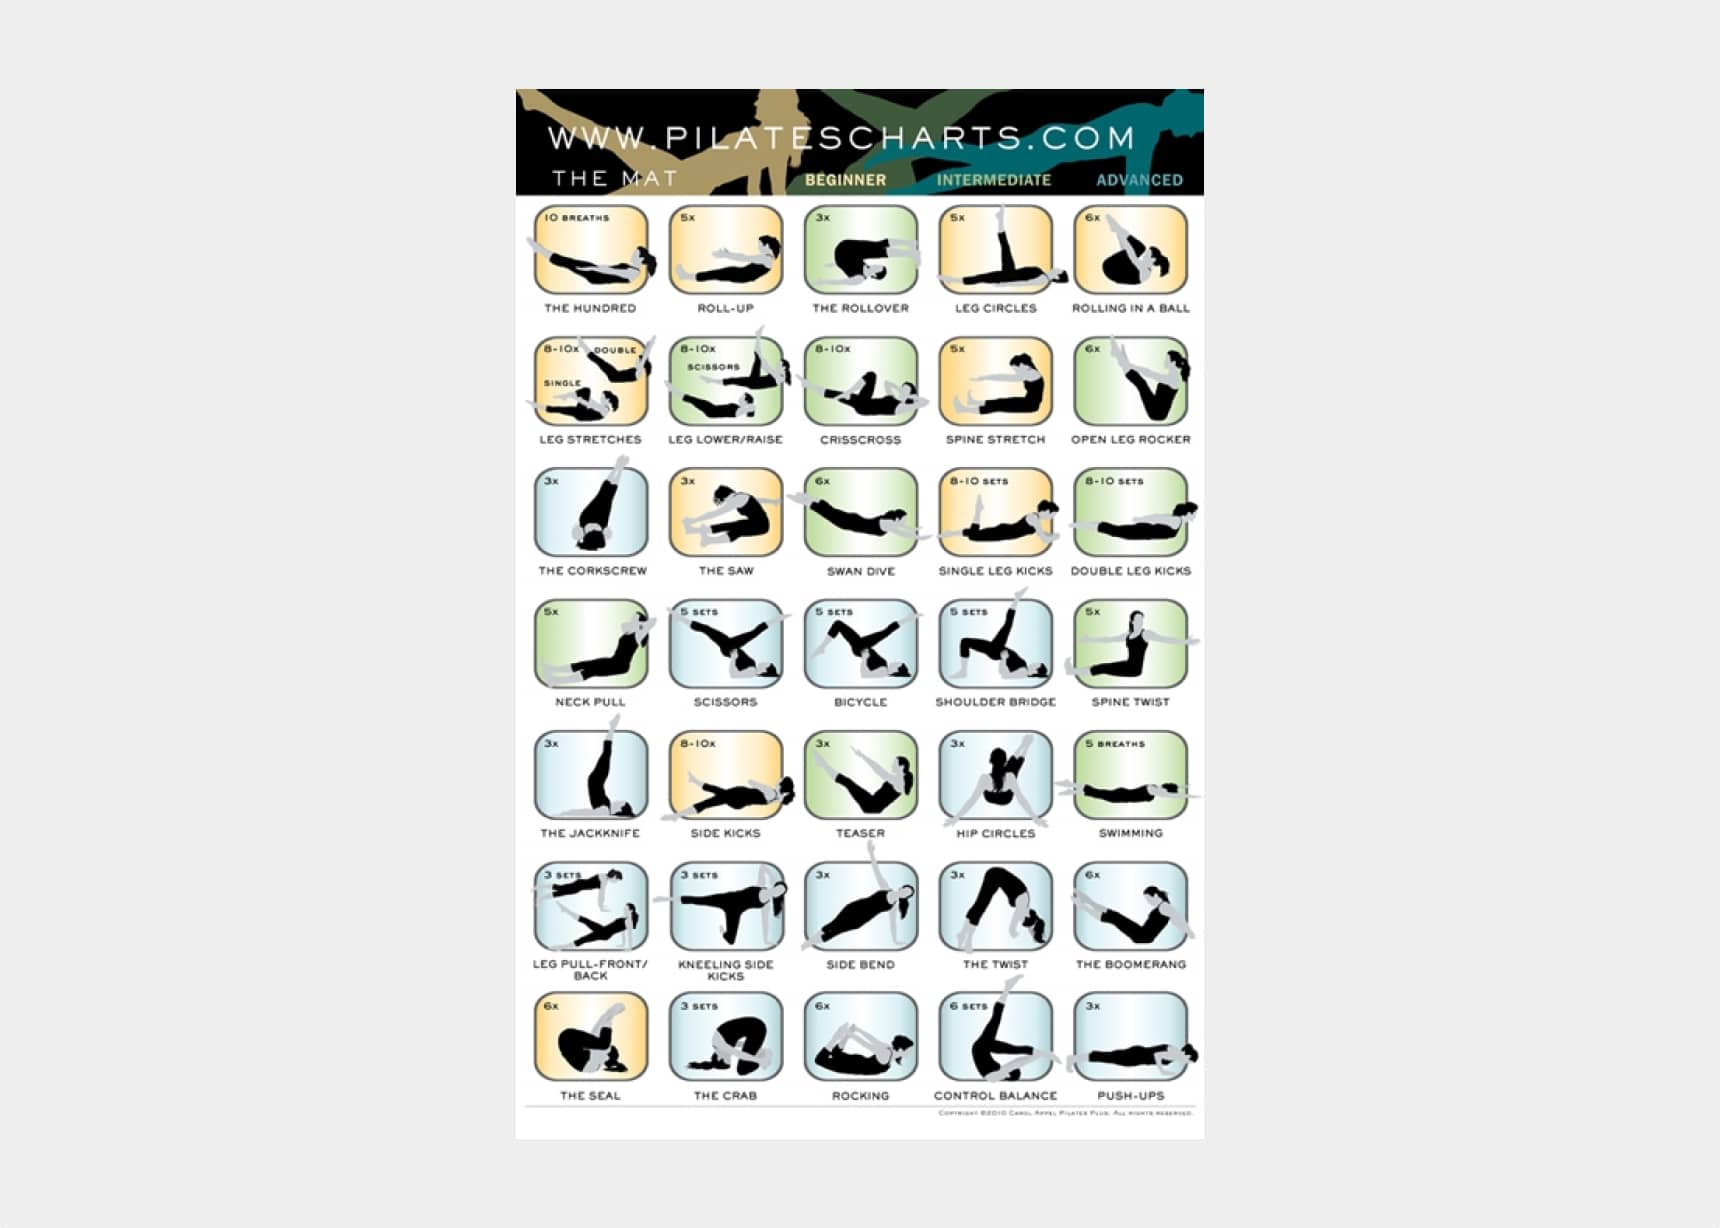 Wall Pilates Workouts: 28 Day Wall Pilates Exercise Chart and 7 Day Wall  Pilates for Seniors, Women and Beginners. Fitness Planner. Balance and   Wall Pilates Part 1, Part 2, and Chair